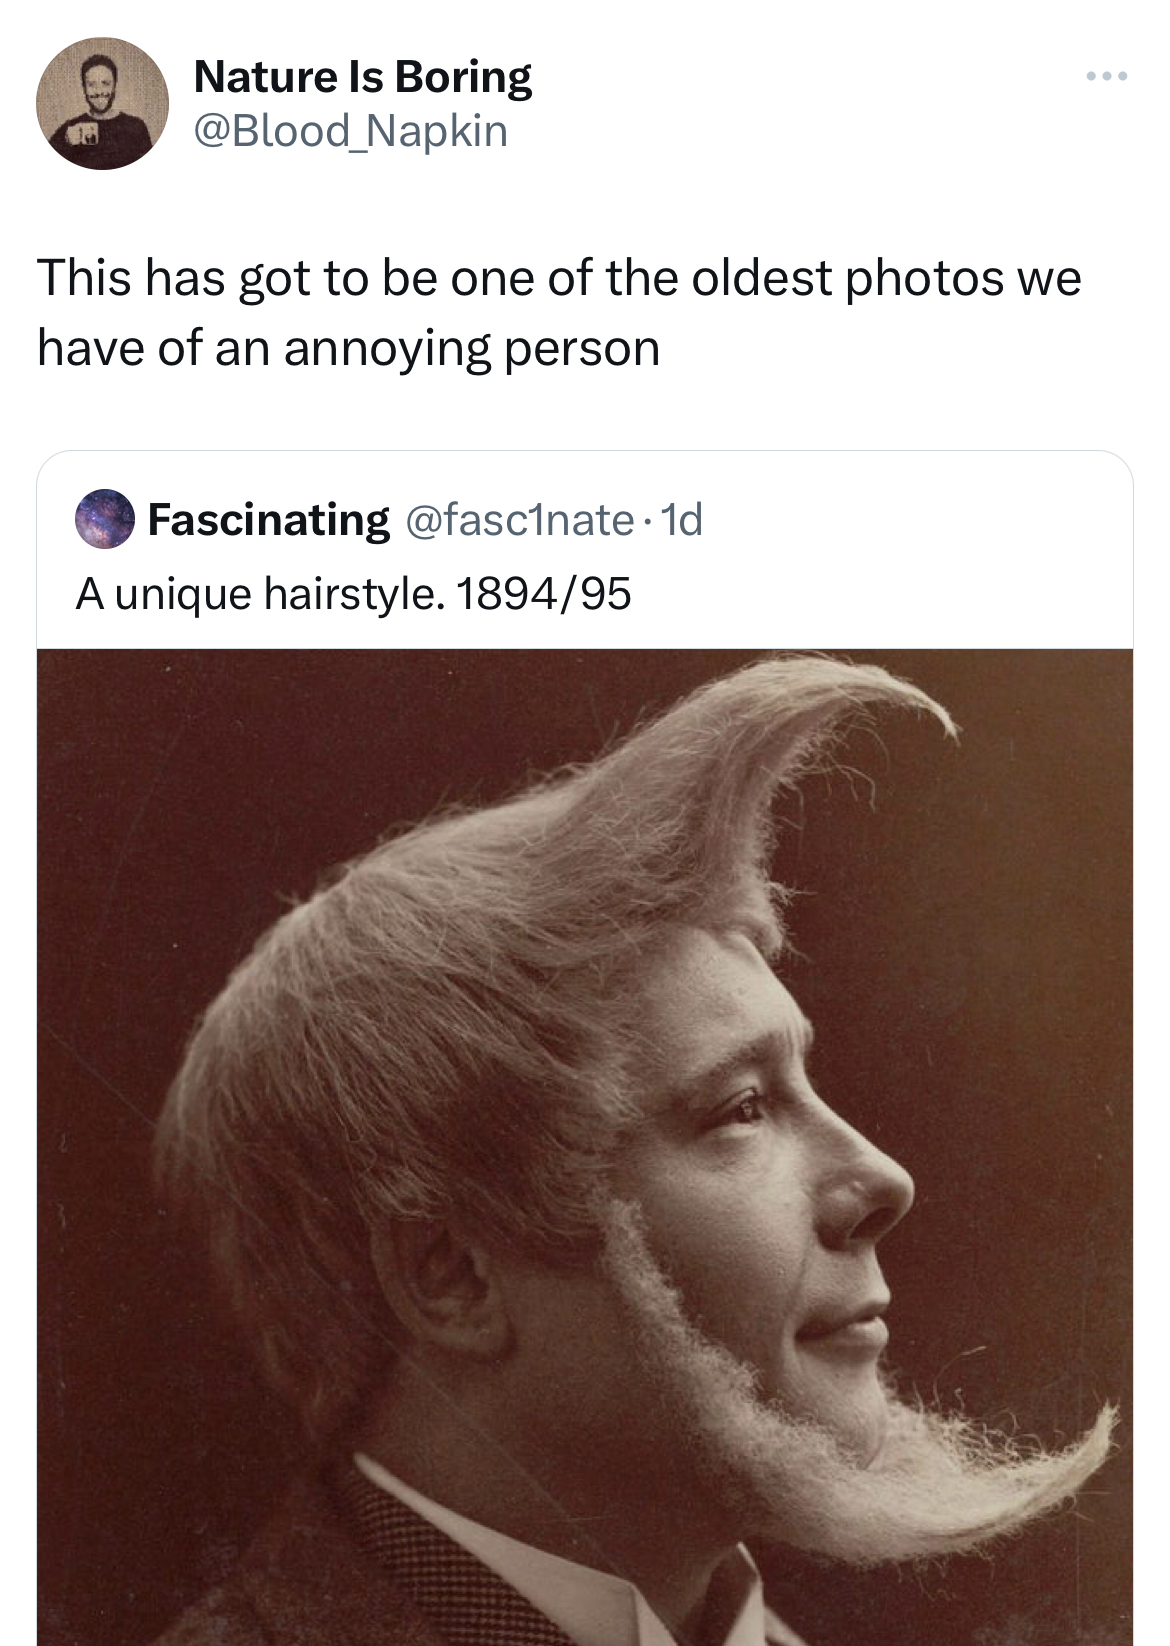 savage and absurd tweets - john garrideb - Nature Is Boring Napkin This has got to be one of the oldest photos we have of an annoying person Fascinating .1d A unique hairstyle. 189495